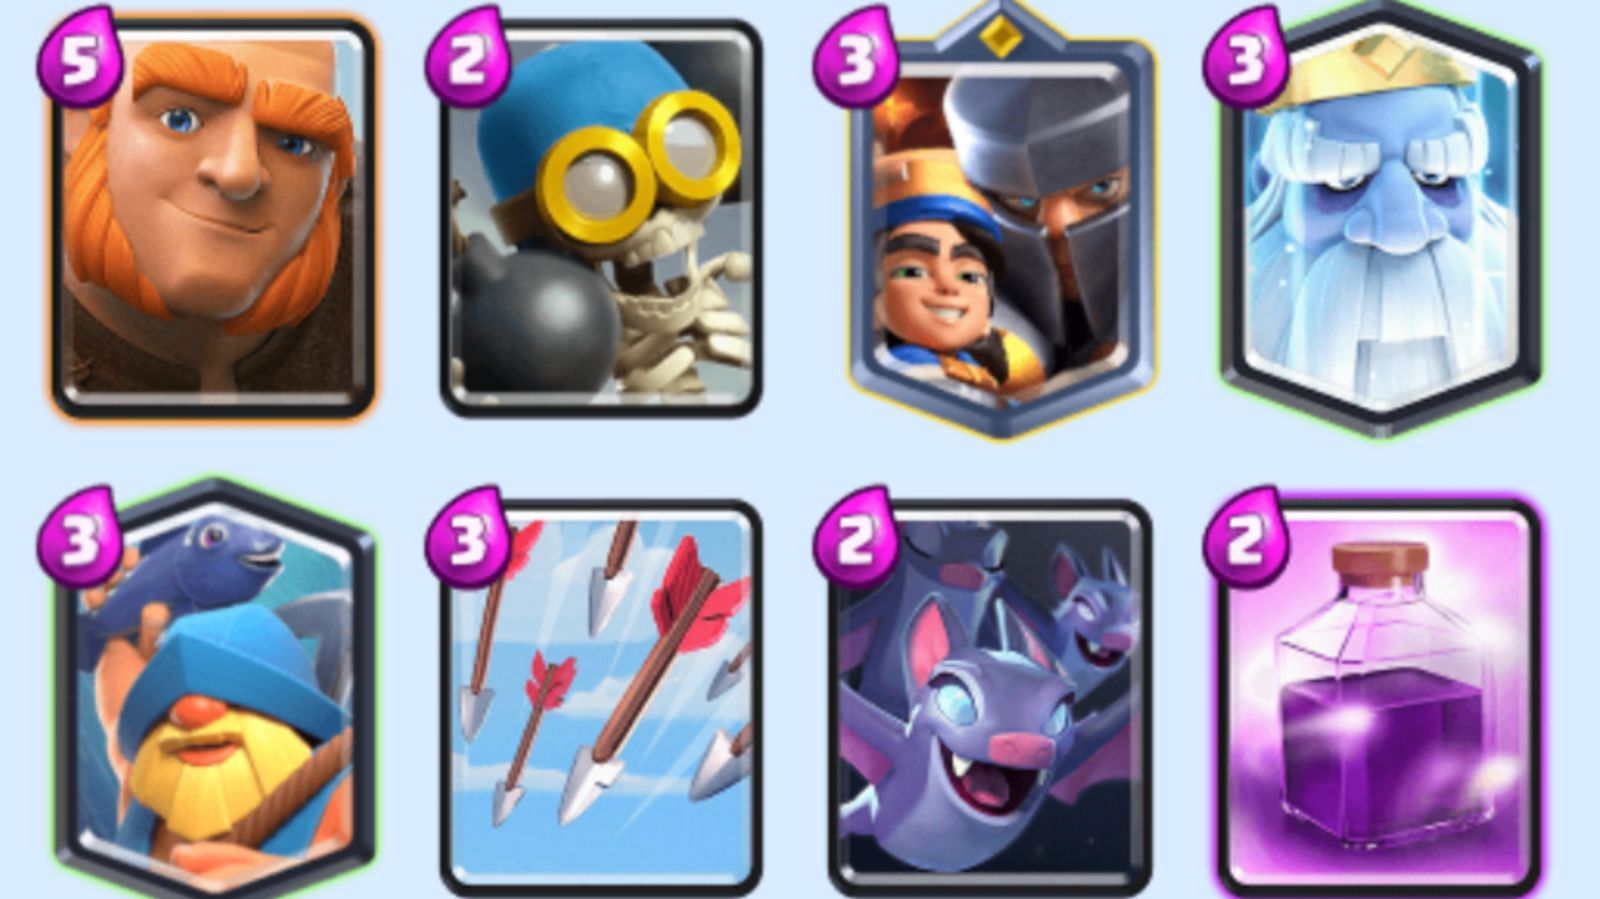 Giant-Fisherman deck (Image via Supercell)